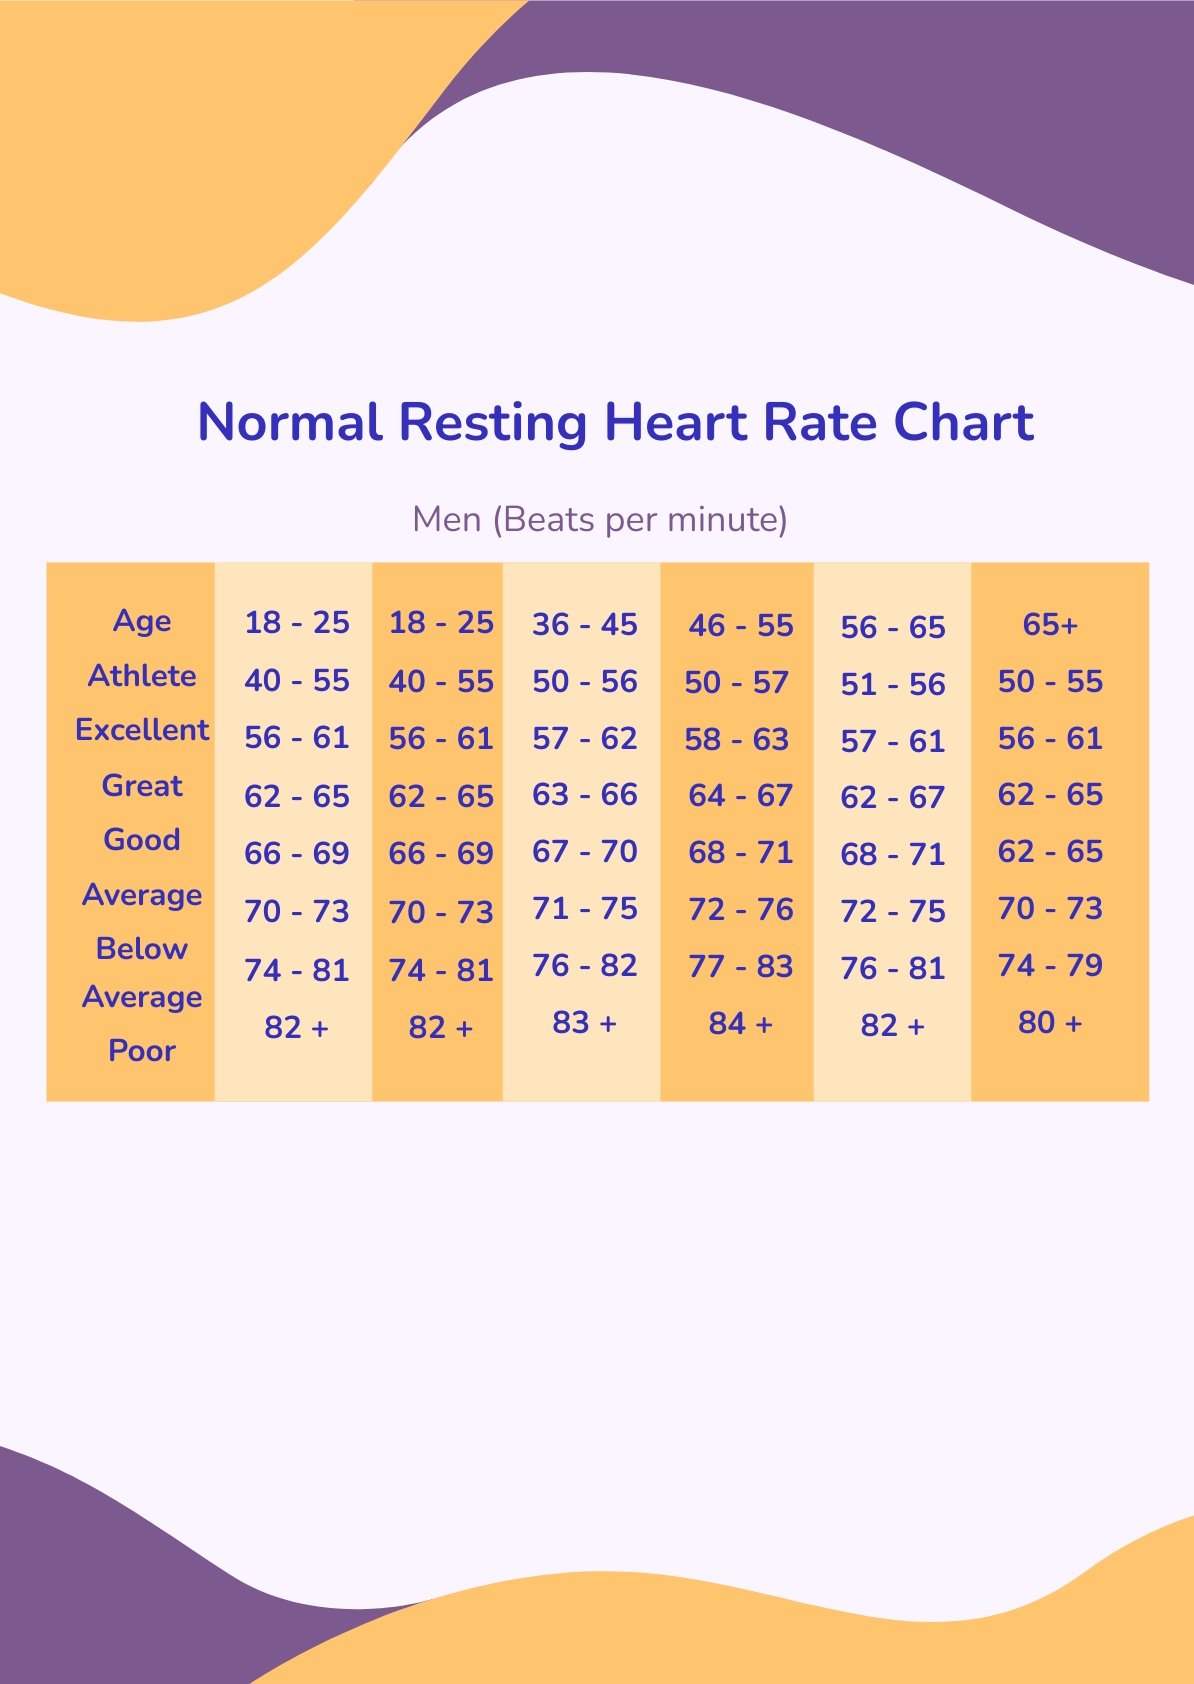 Normal Resting Heart Rate Chart